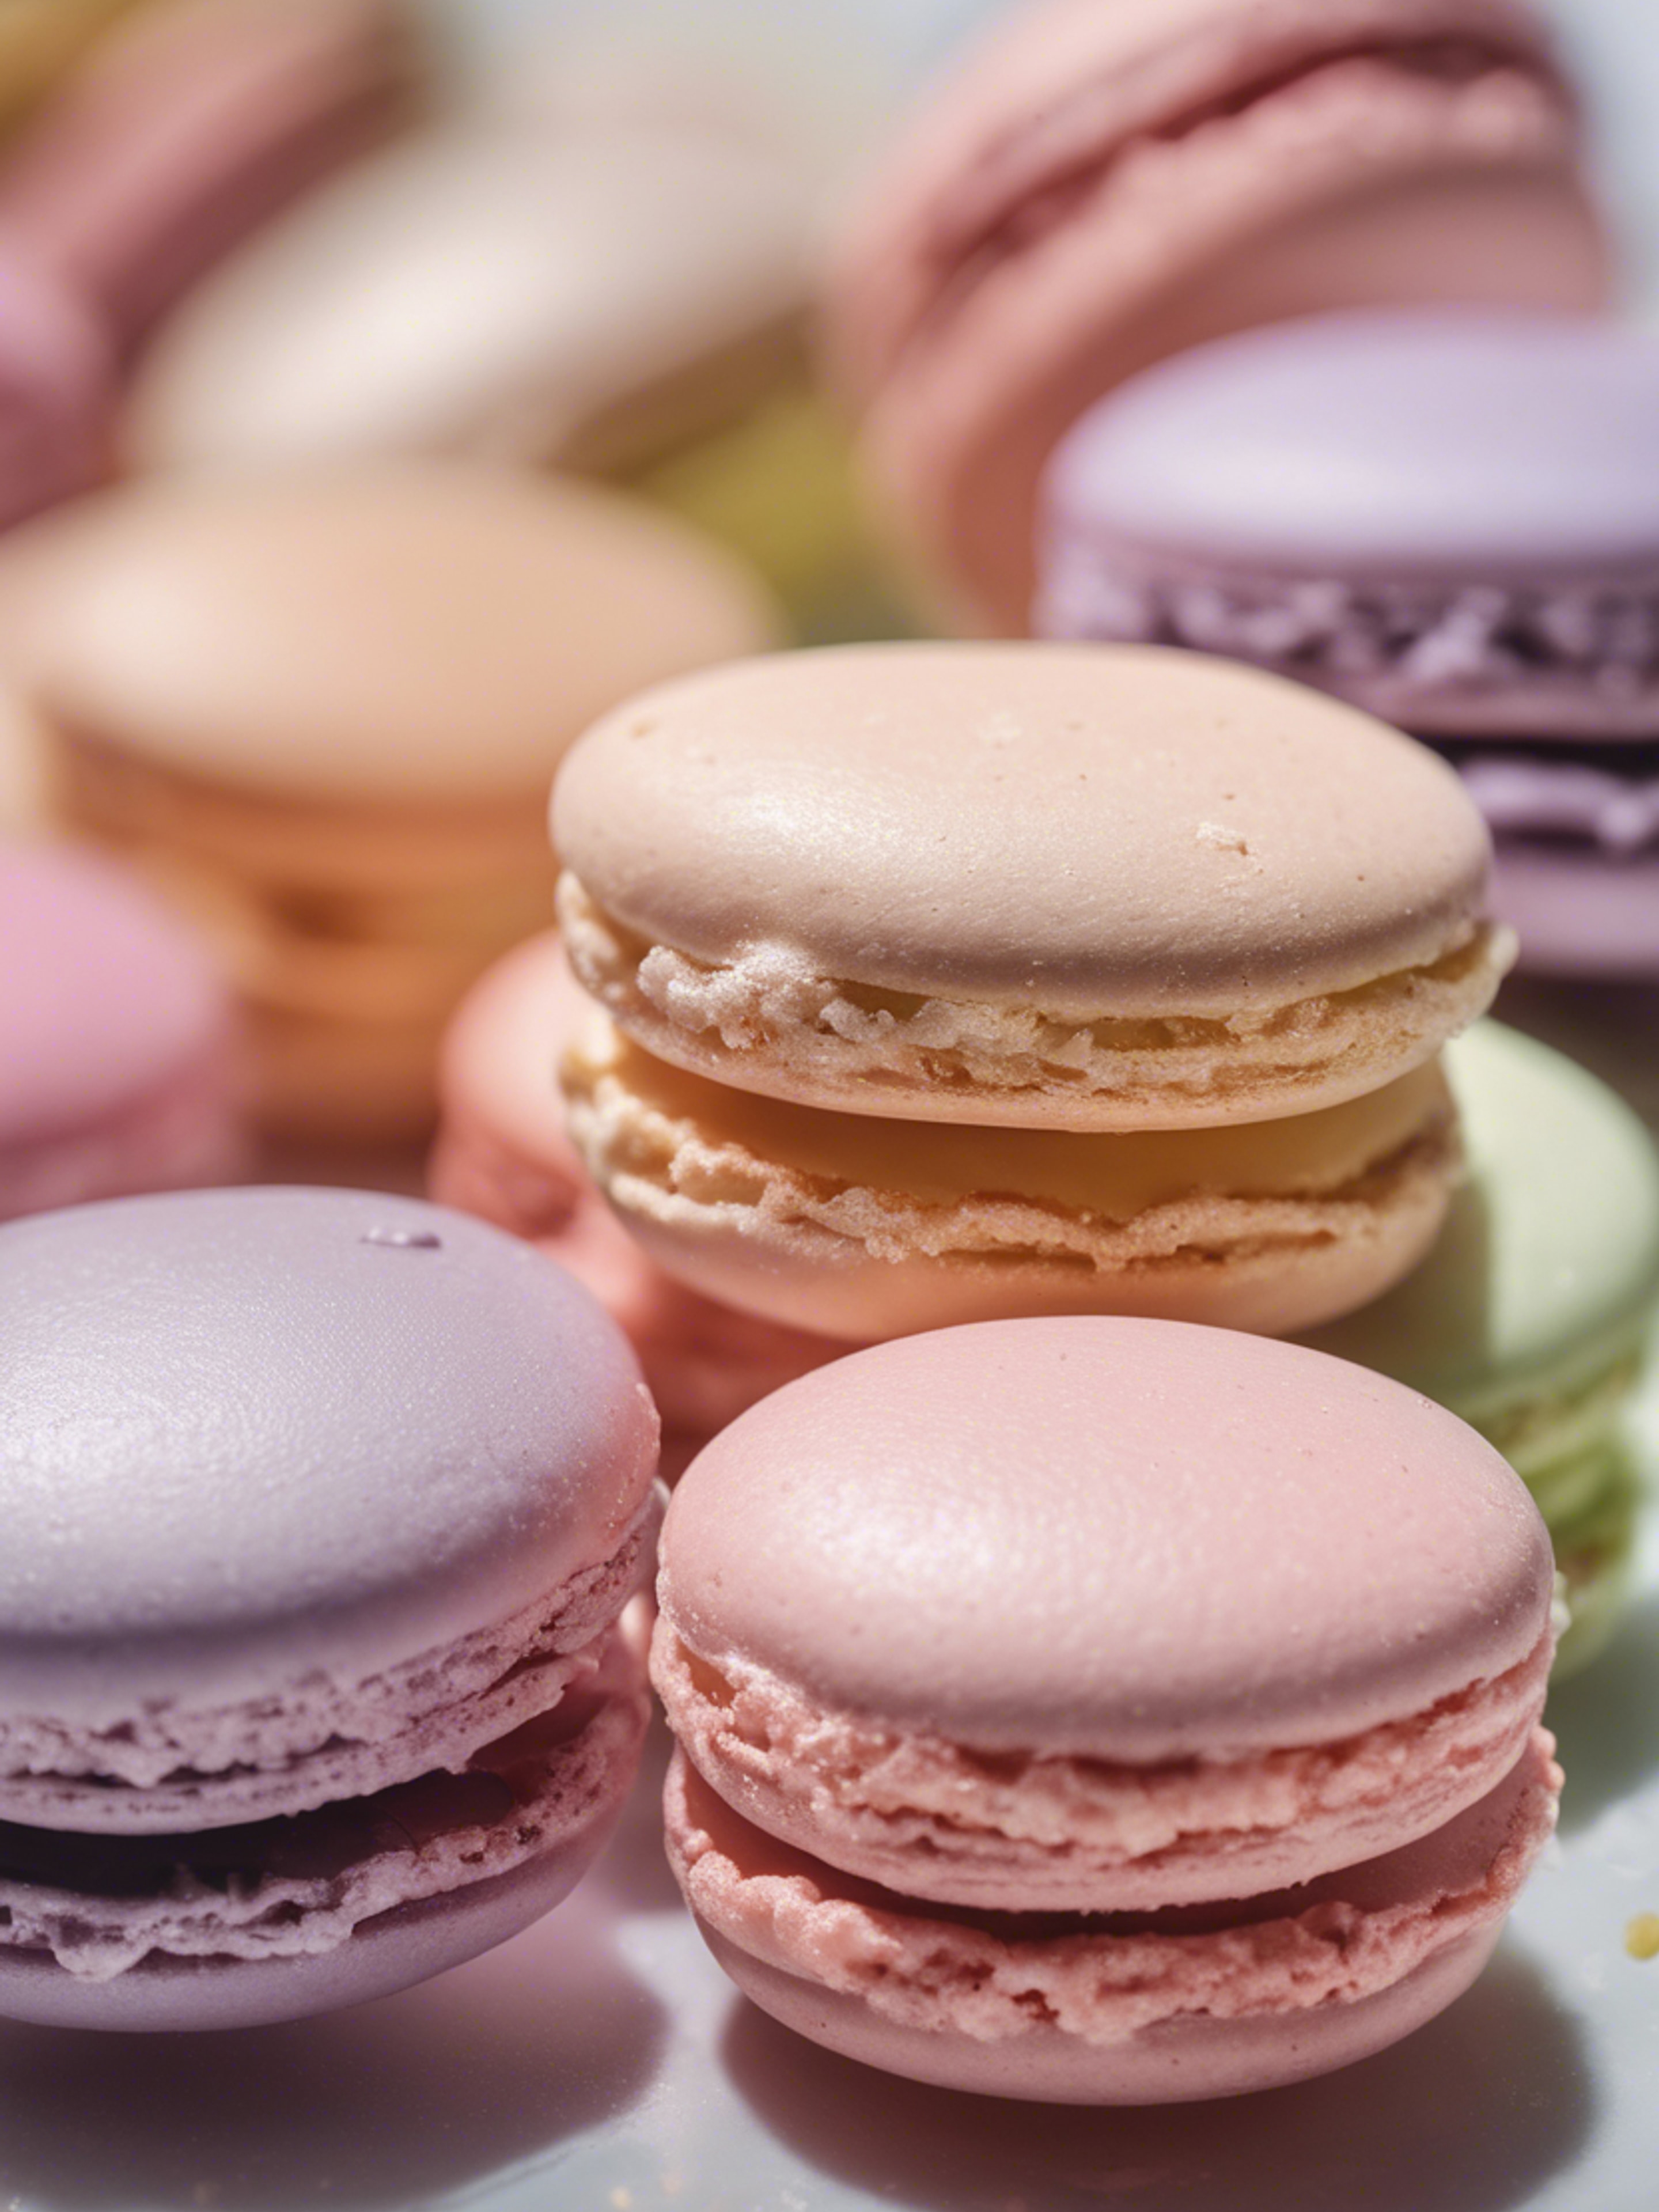 A close-up view of a cool pastel colored macaron making process.壁紙[347d58695ee94000a1fc]